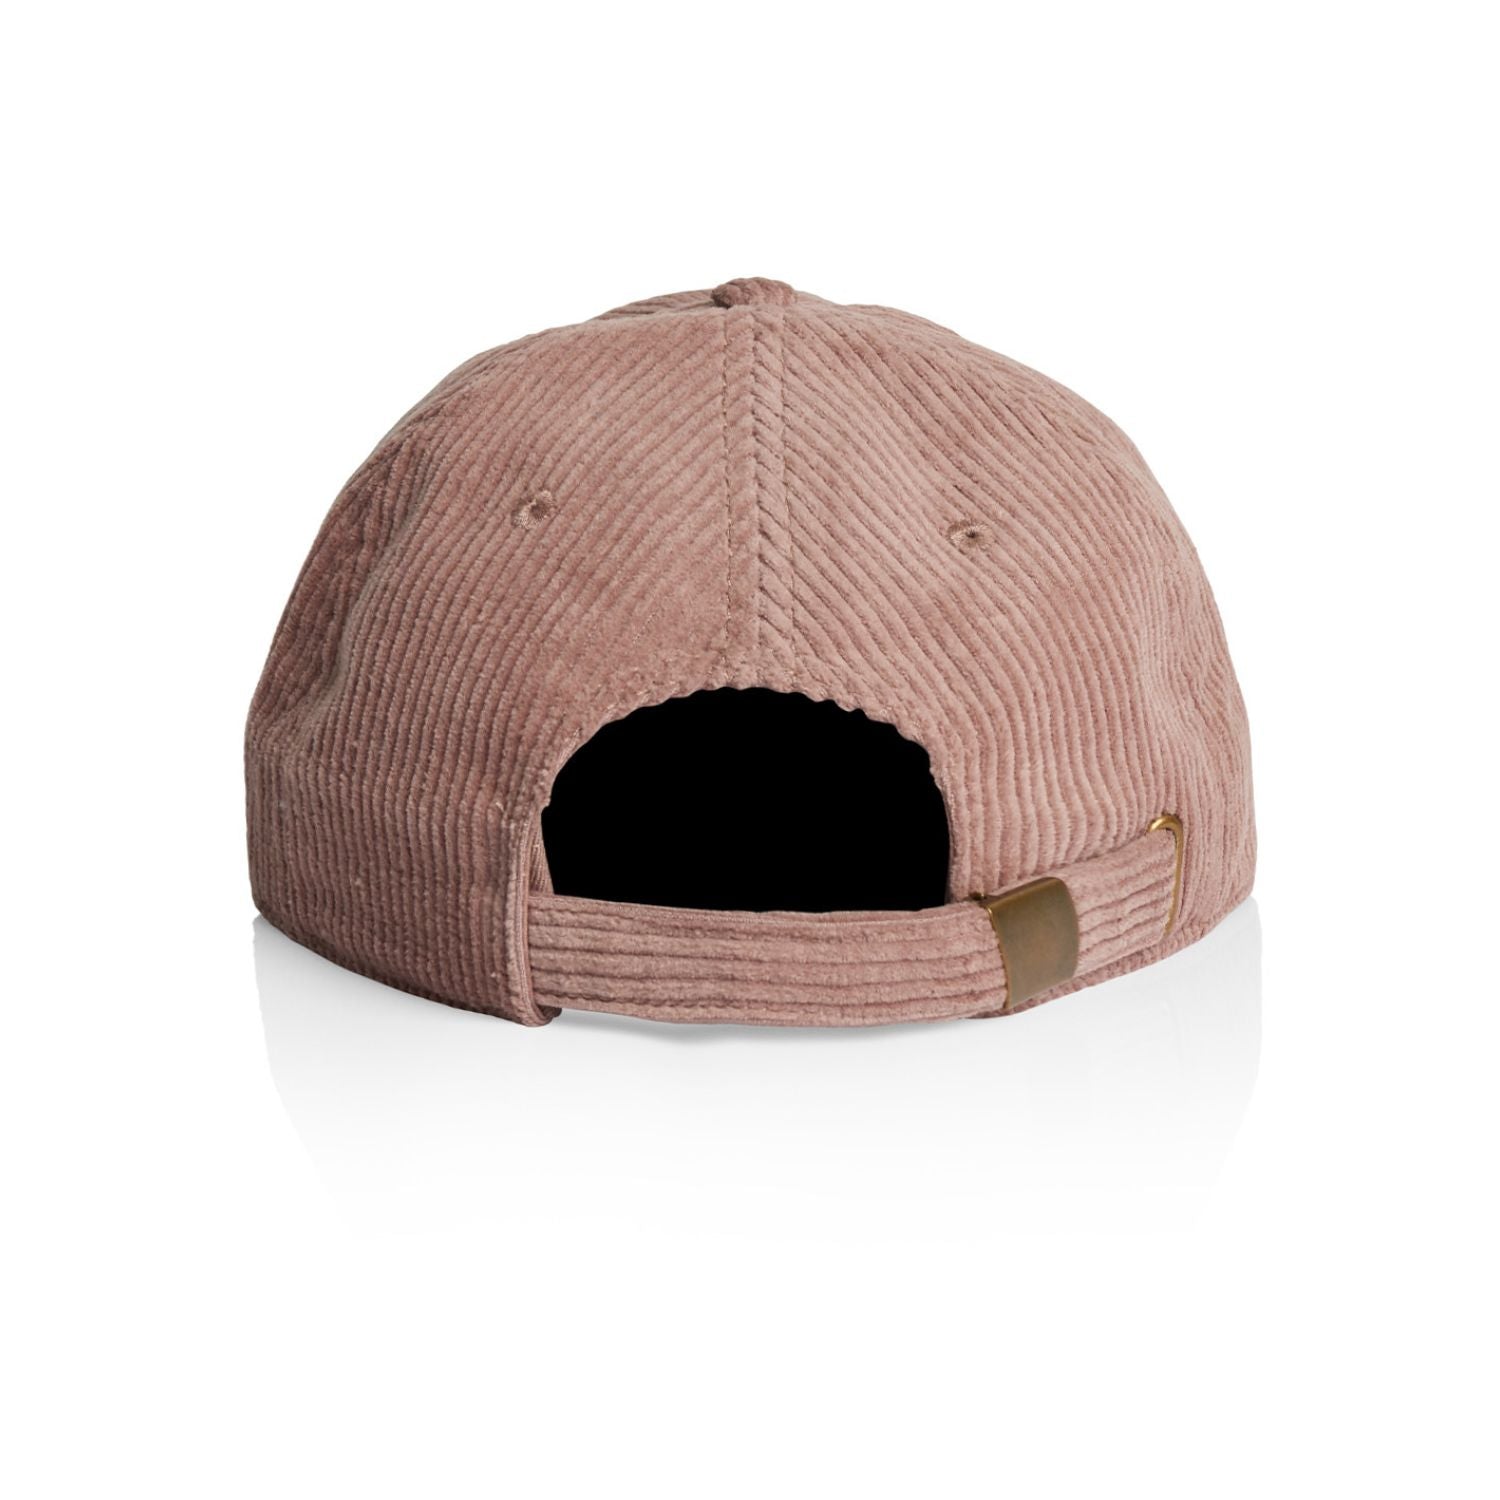 Corduroy Cap with Fin & Anchor Patch